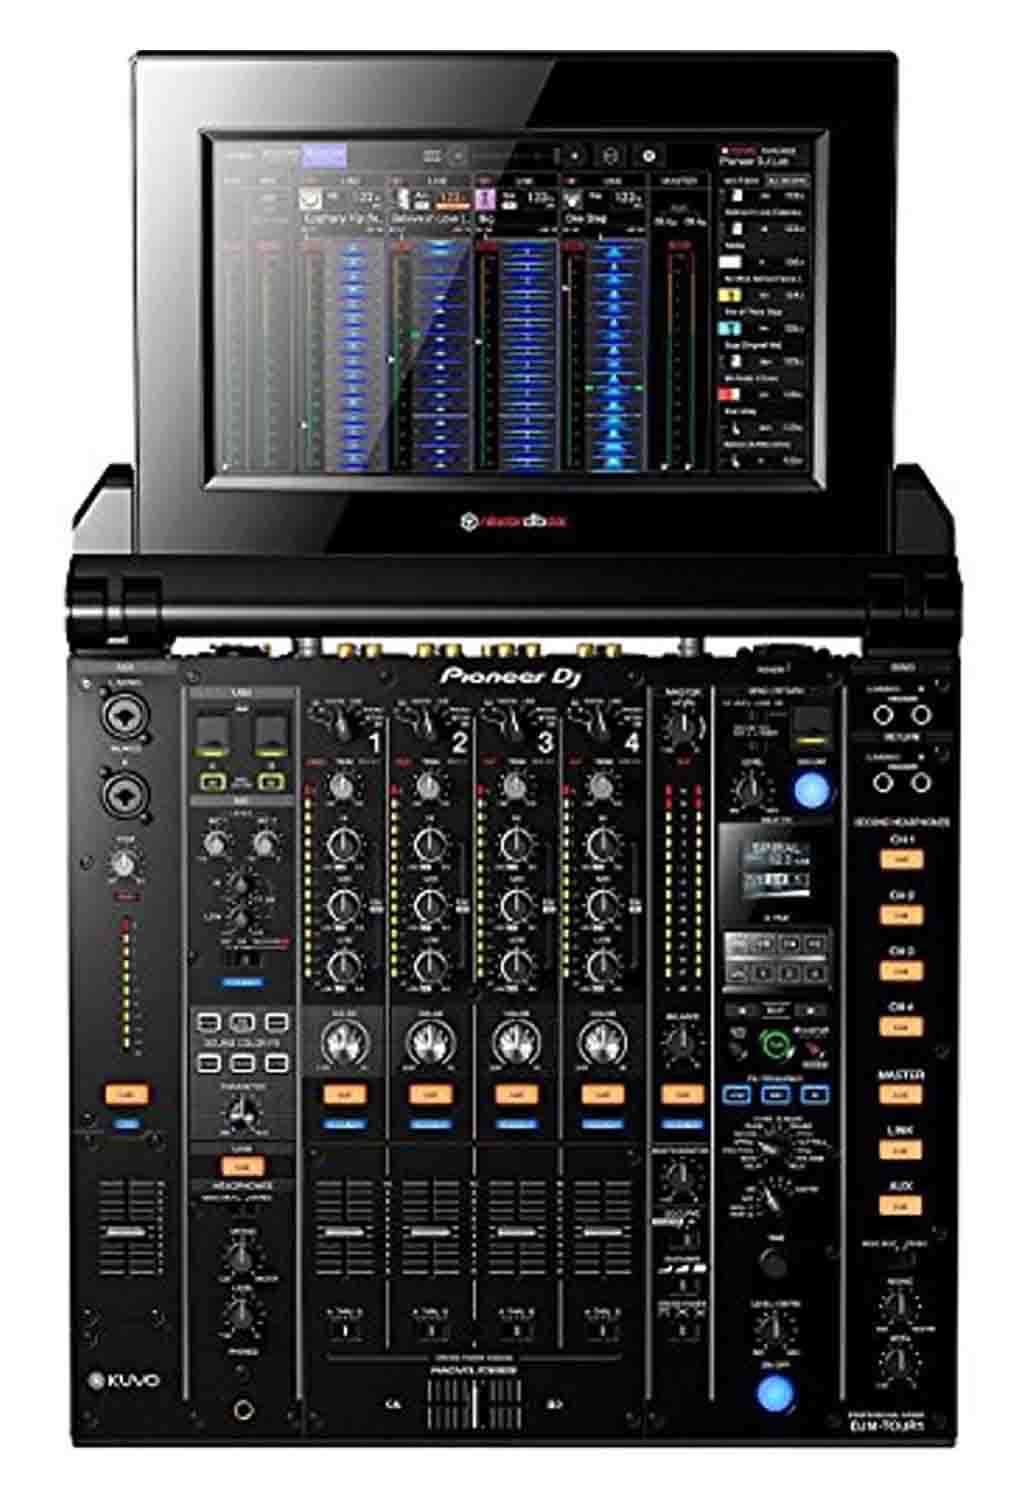 Pioneer DJ DJM-TOUR1 Tour System 4-Channel Digital Mixer with Foldout Touch Screen - Hollywood DJ